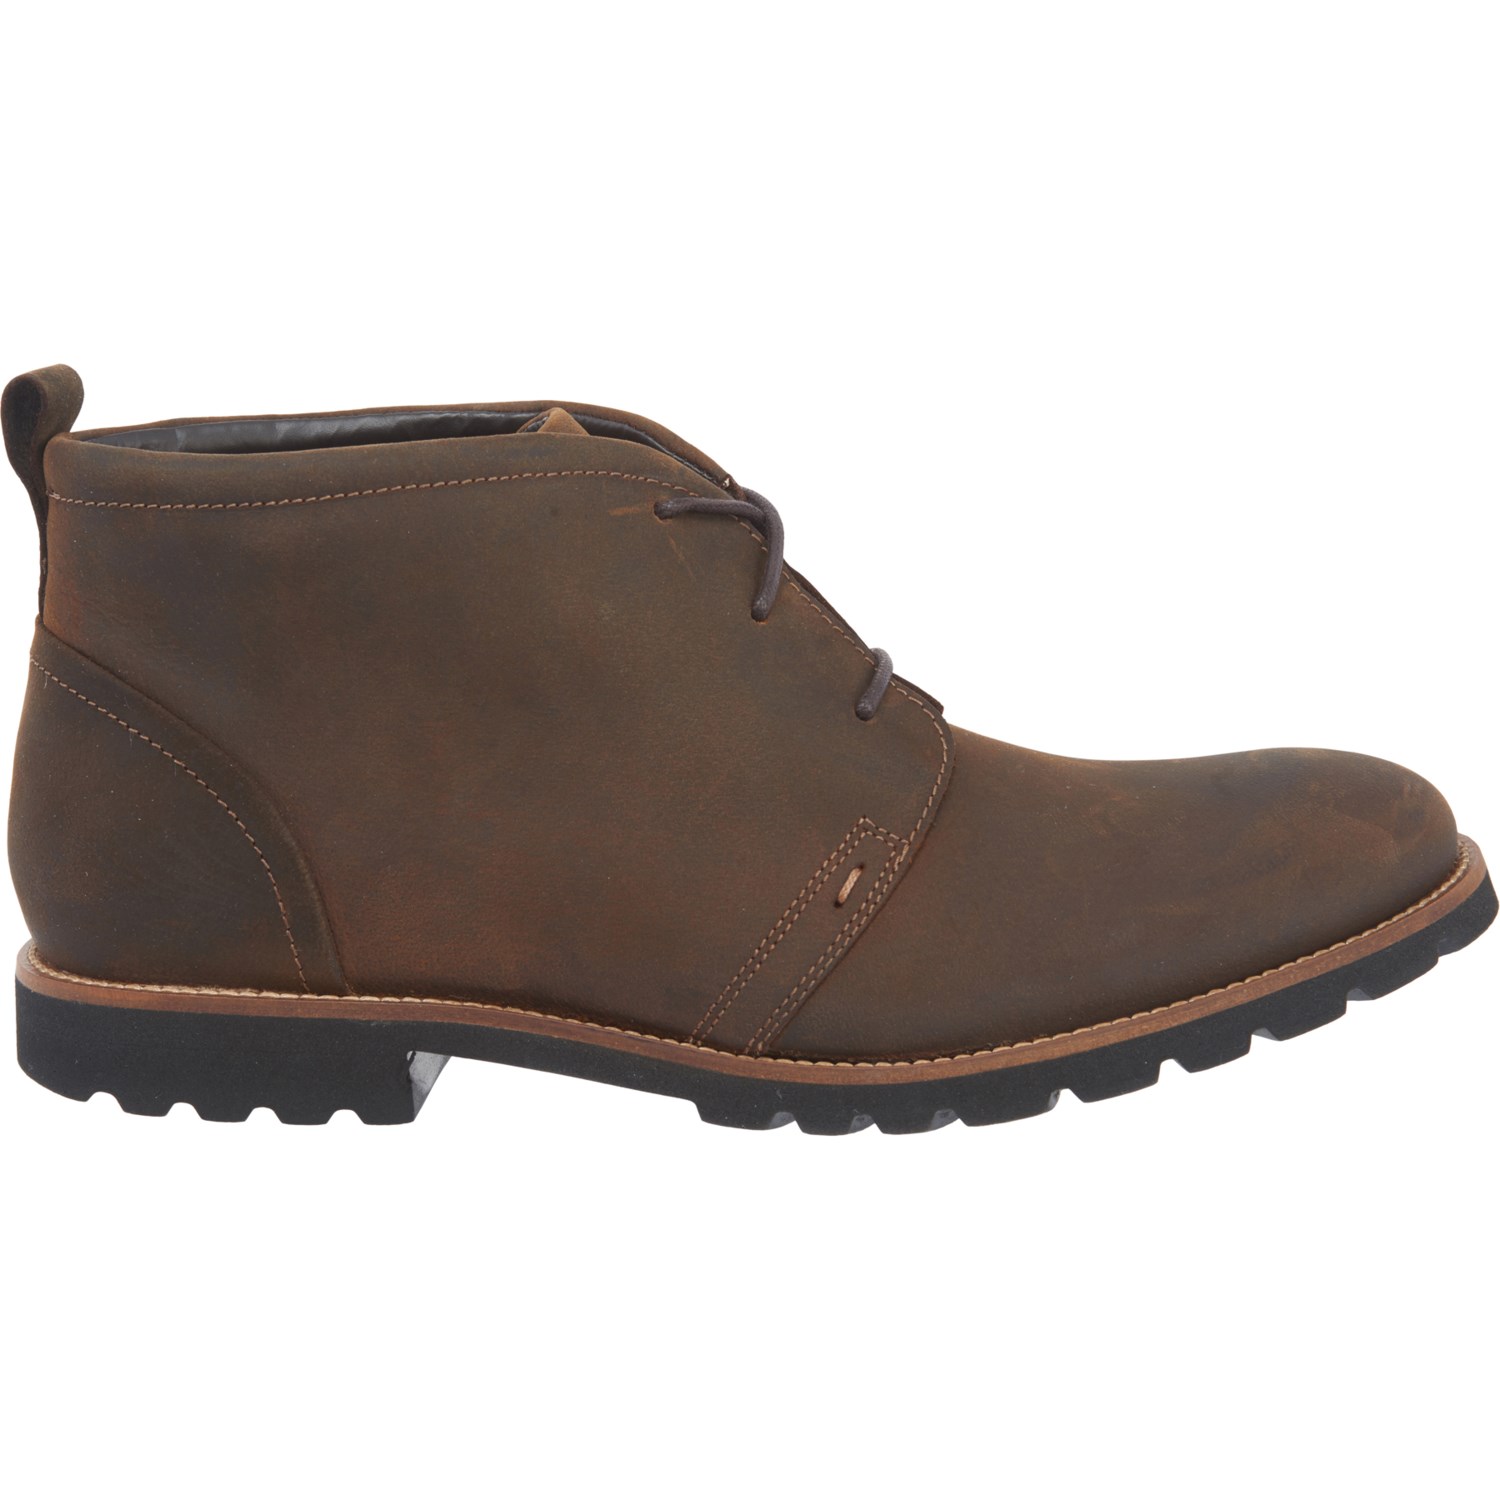 Rockport Charson Chukka Boots (For Men) - Save 33%